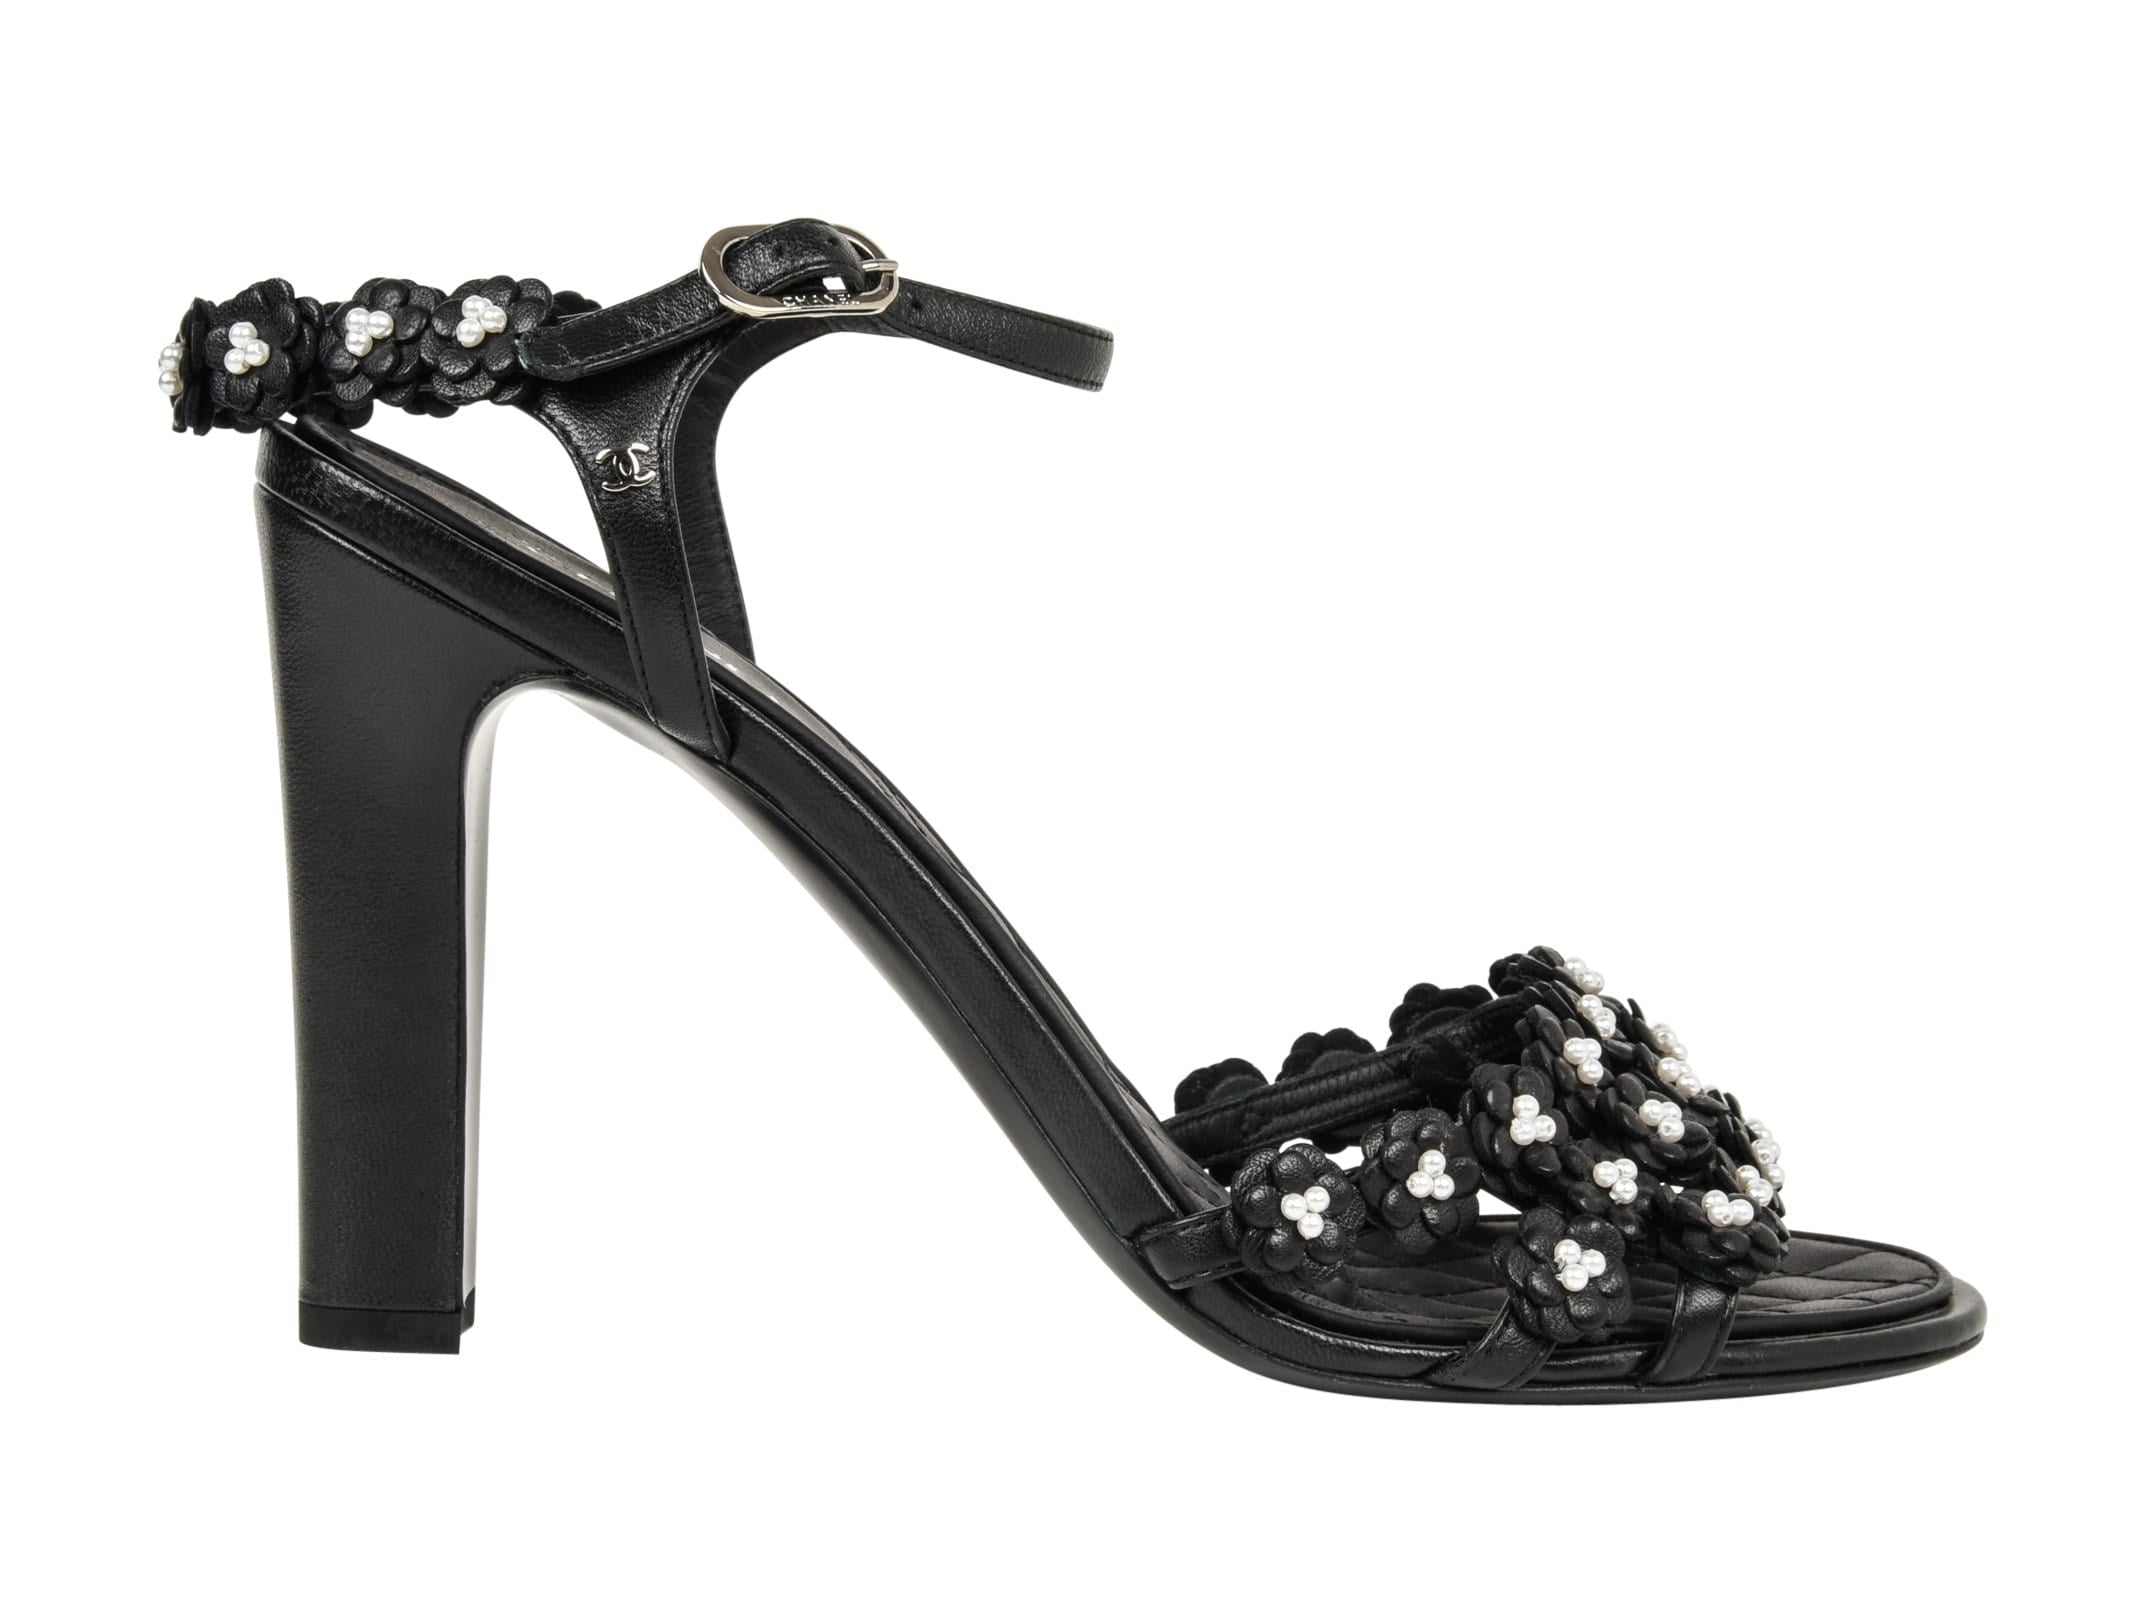 Chanel Shoe Camellia Black Leather Flowers w/ Pearls Sandal 40 / 10 New - mightychic